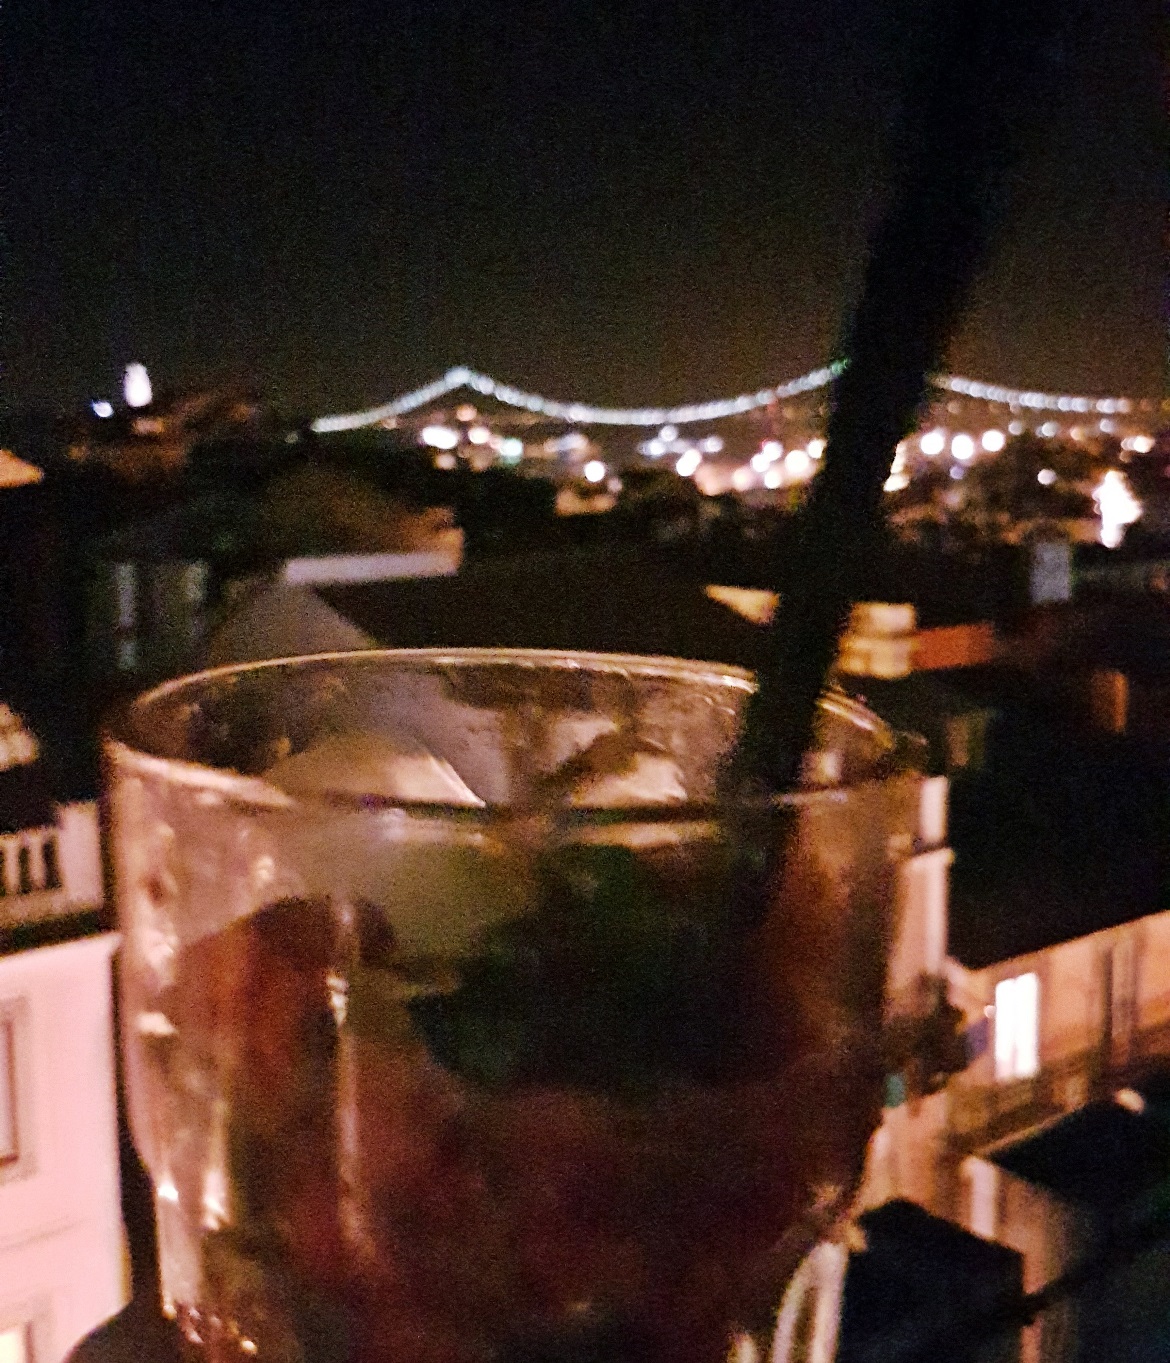 Drink with a view at Park Bar - Food and Drink in Lisbon, review by BeckyBecky Blogs